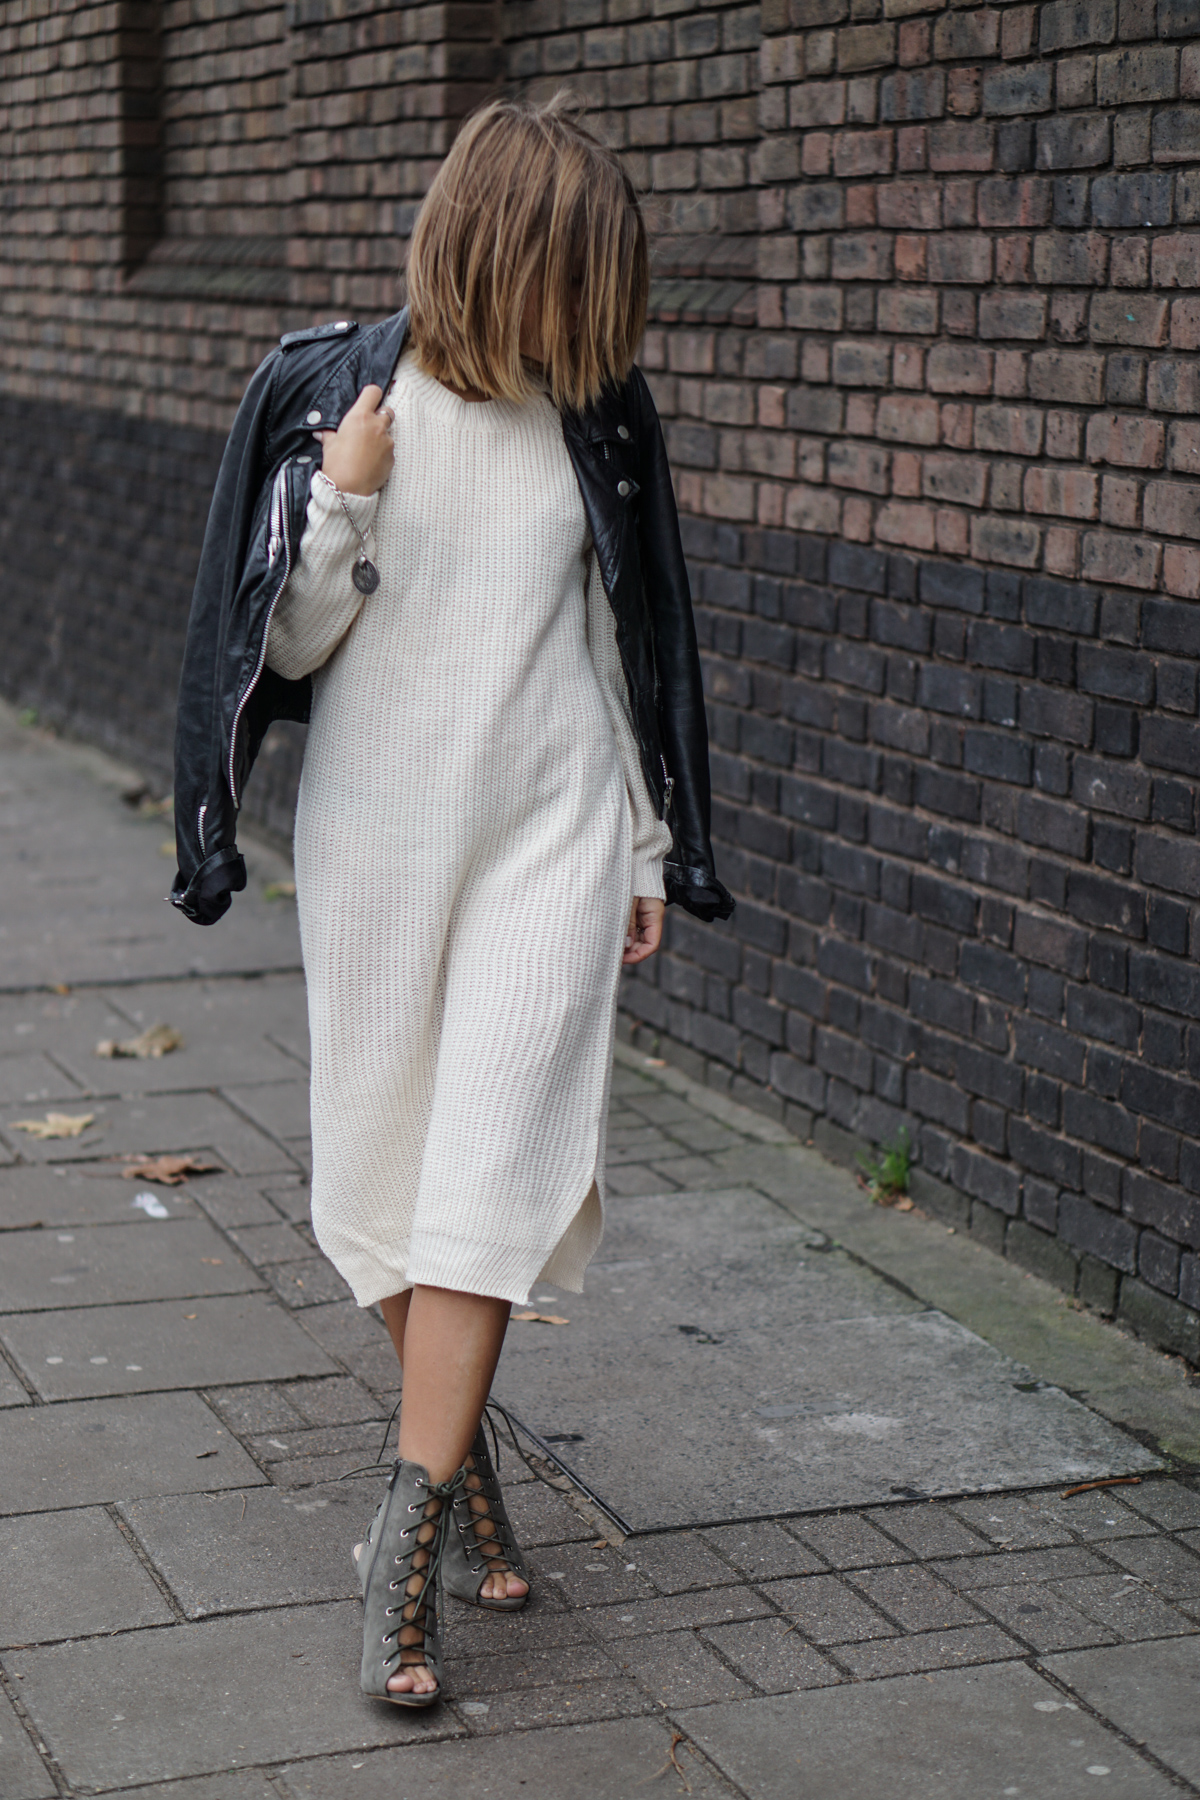 Steal Her Style: Sweater Dress Worn Two Ways | Love Daily Dose